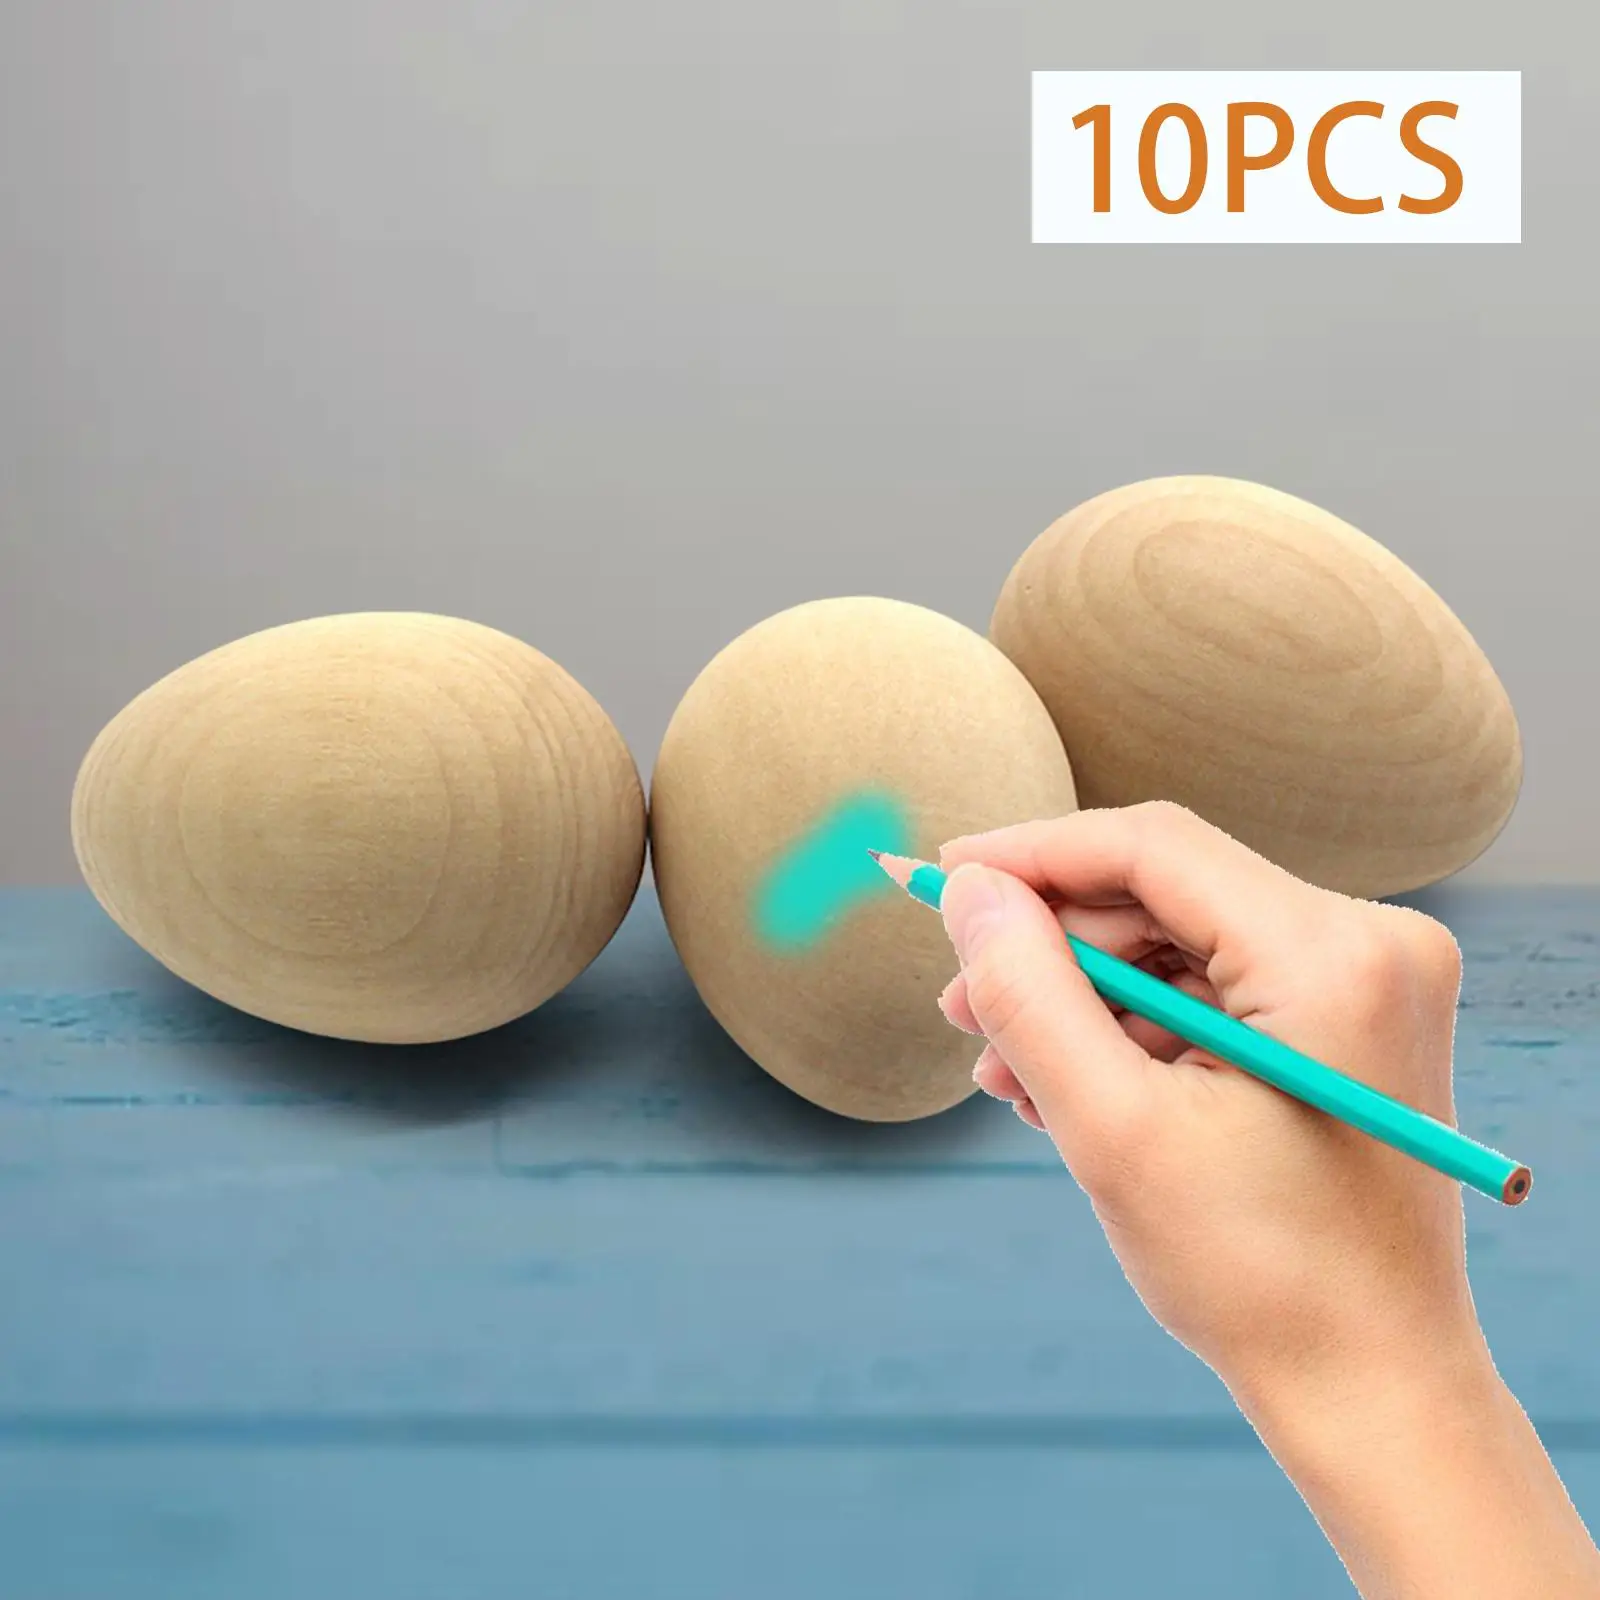 10 Pieces Smooth DIY Wood Easter Egg,Manual Graffiti Wooden Blank Eggs for DIY Crafts Basket Fillers,Home Decor Ornament